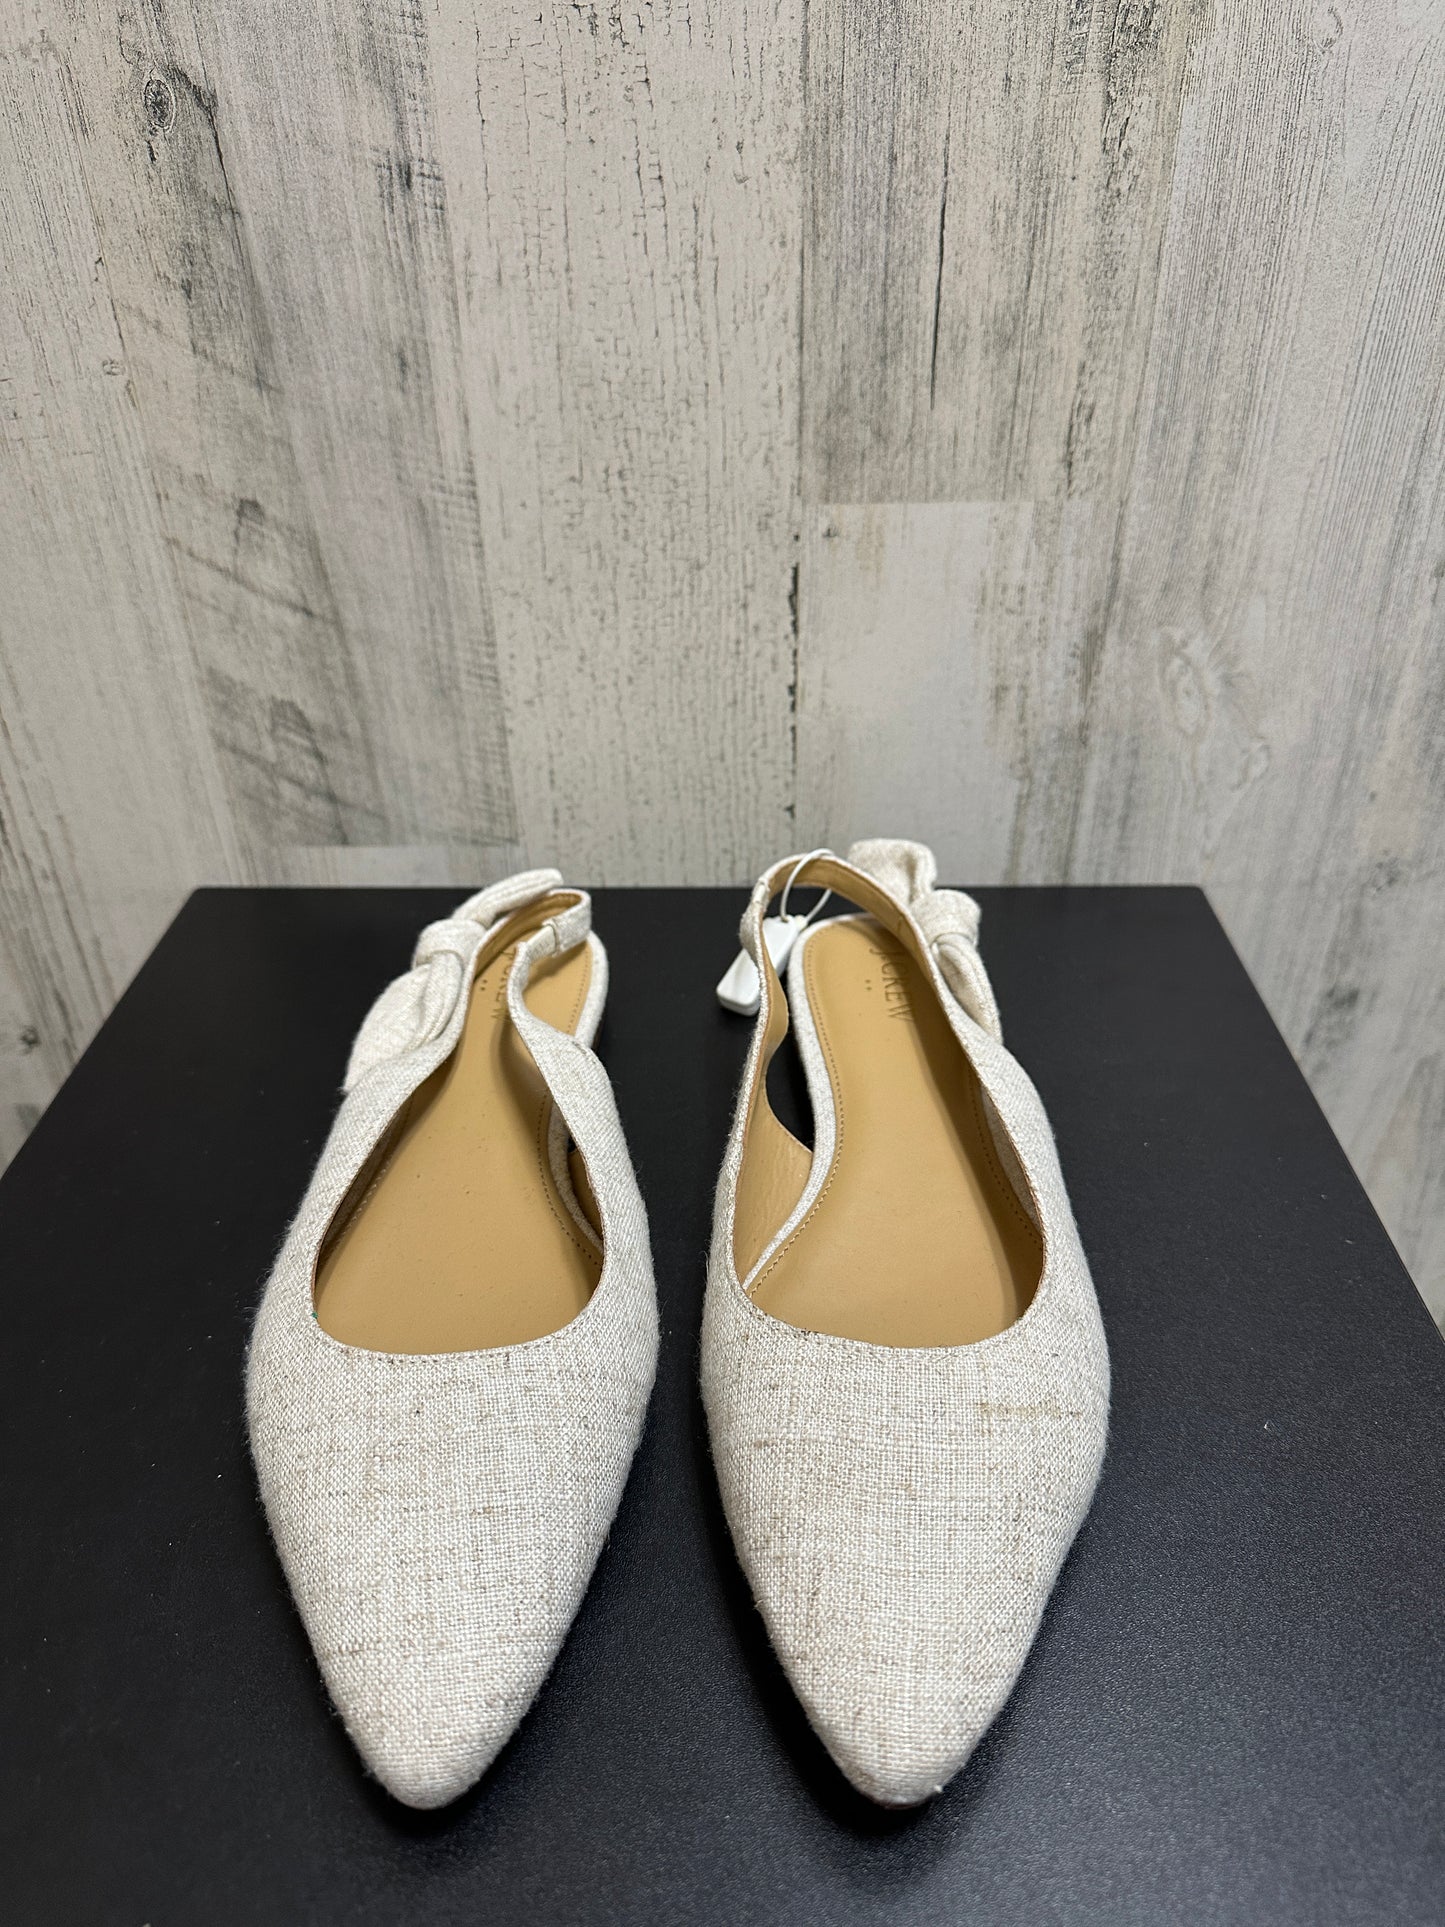 Shoes Flats Ballet By J Crew  Size: 10